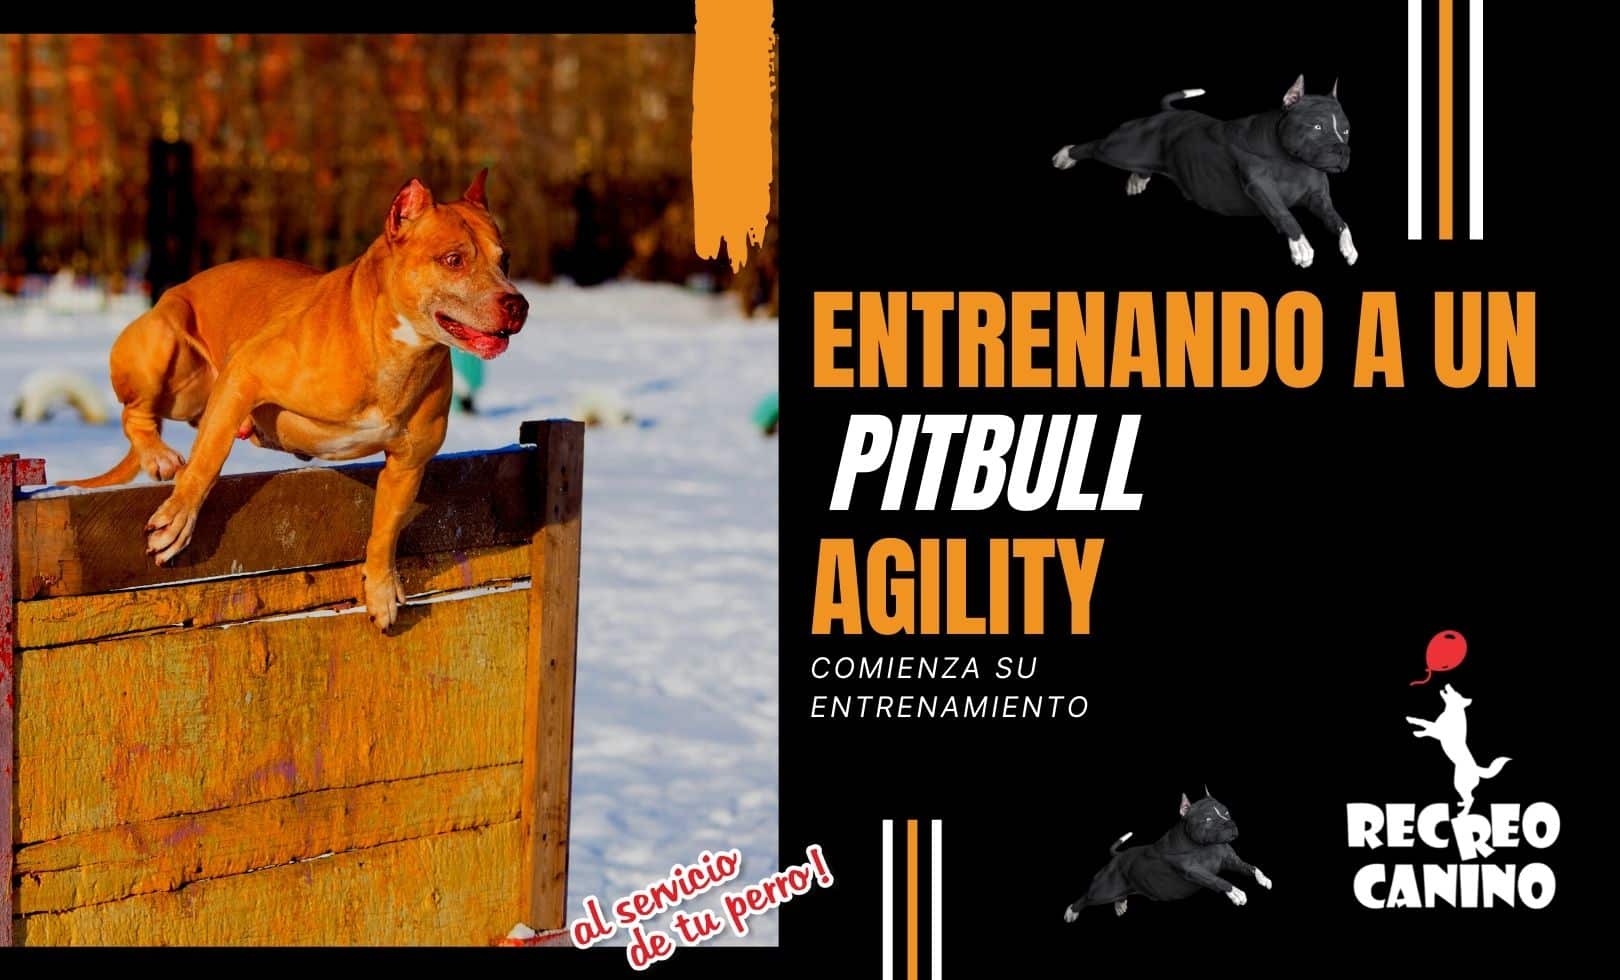 Agility Dog Training And Pit Bull Terriers